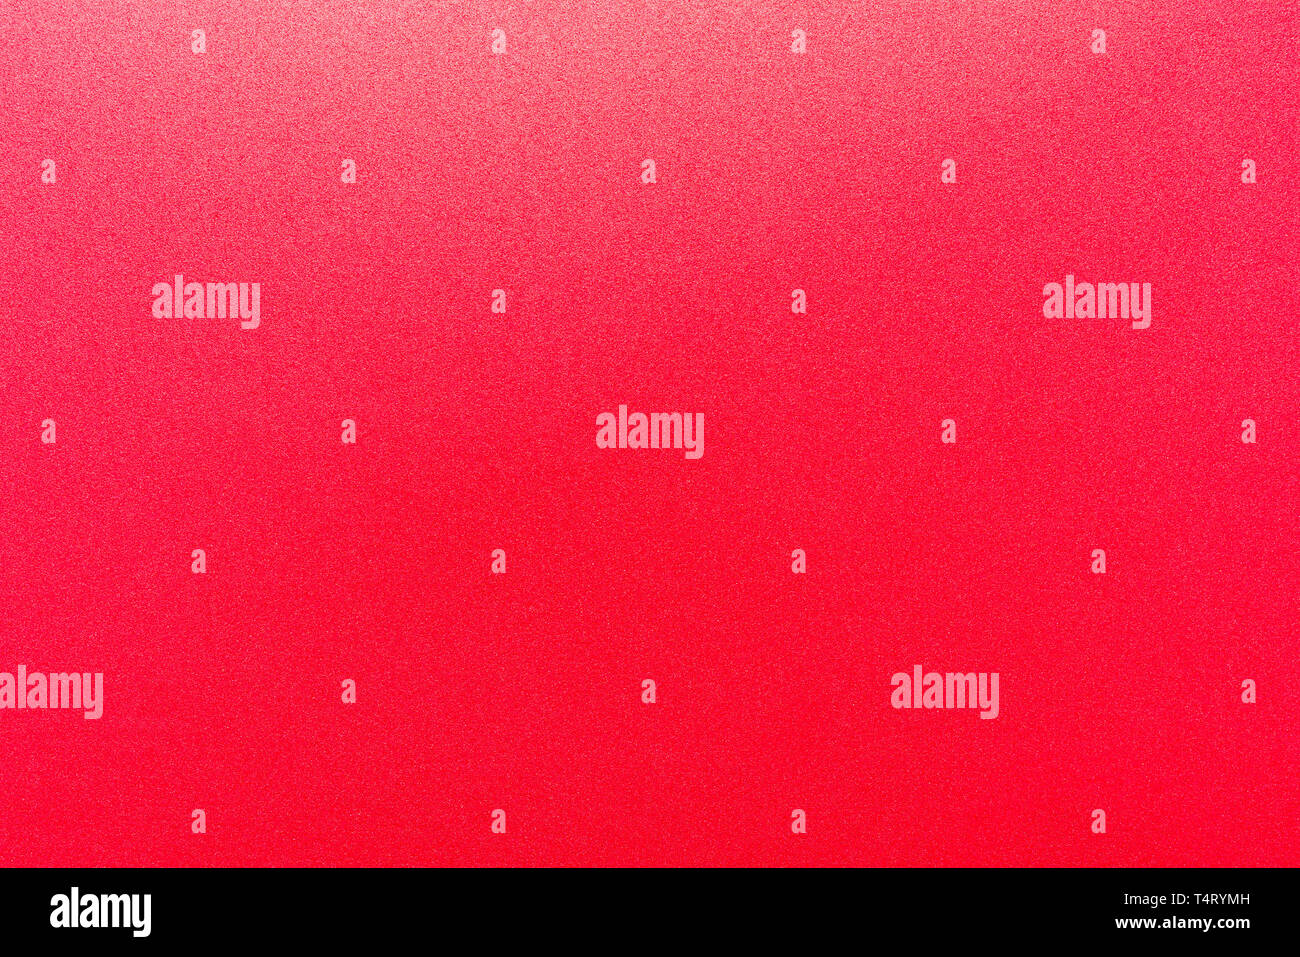 https://c8.alamy.com/comp/T4RYMH/red-gradient-color-with-texture-from-real-foam-sponge-paper-for-background-backdrop-or-design-T4RYMH.jpg